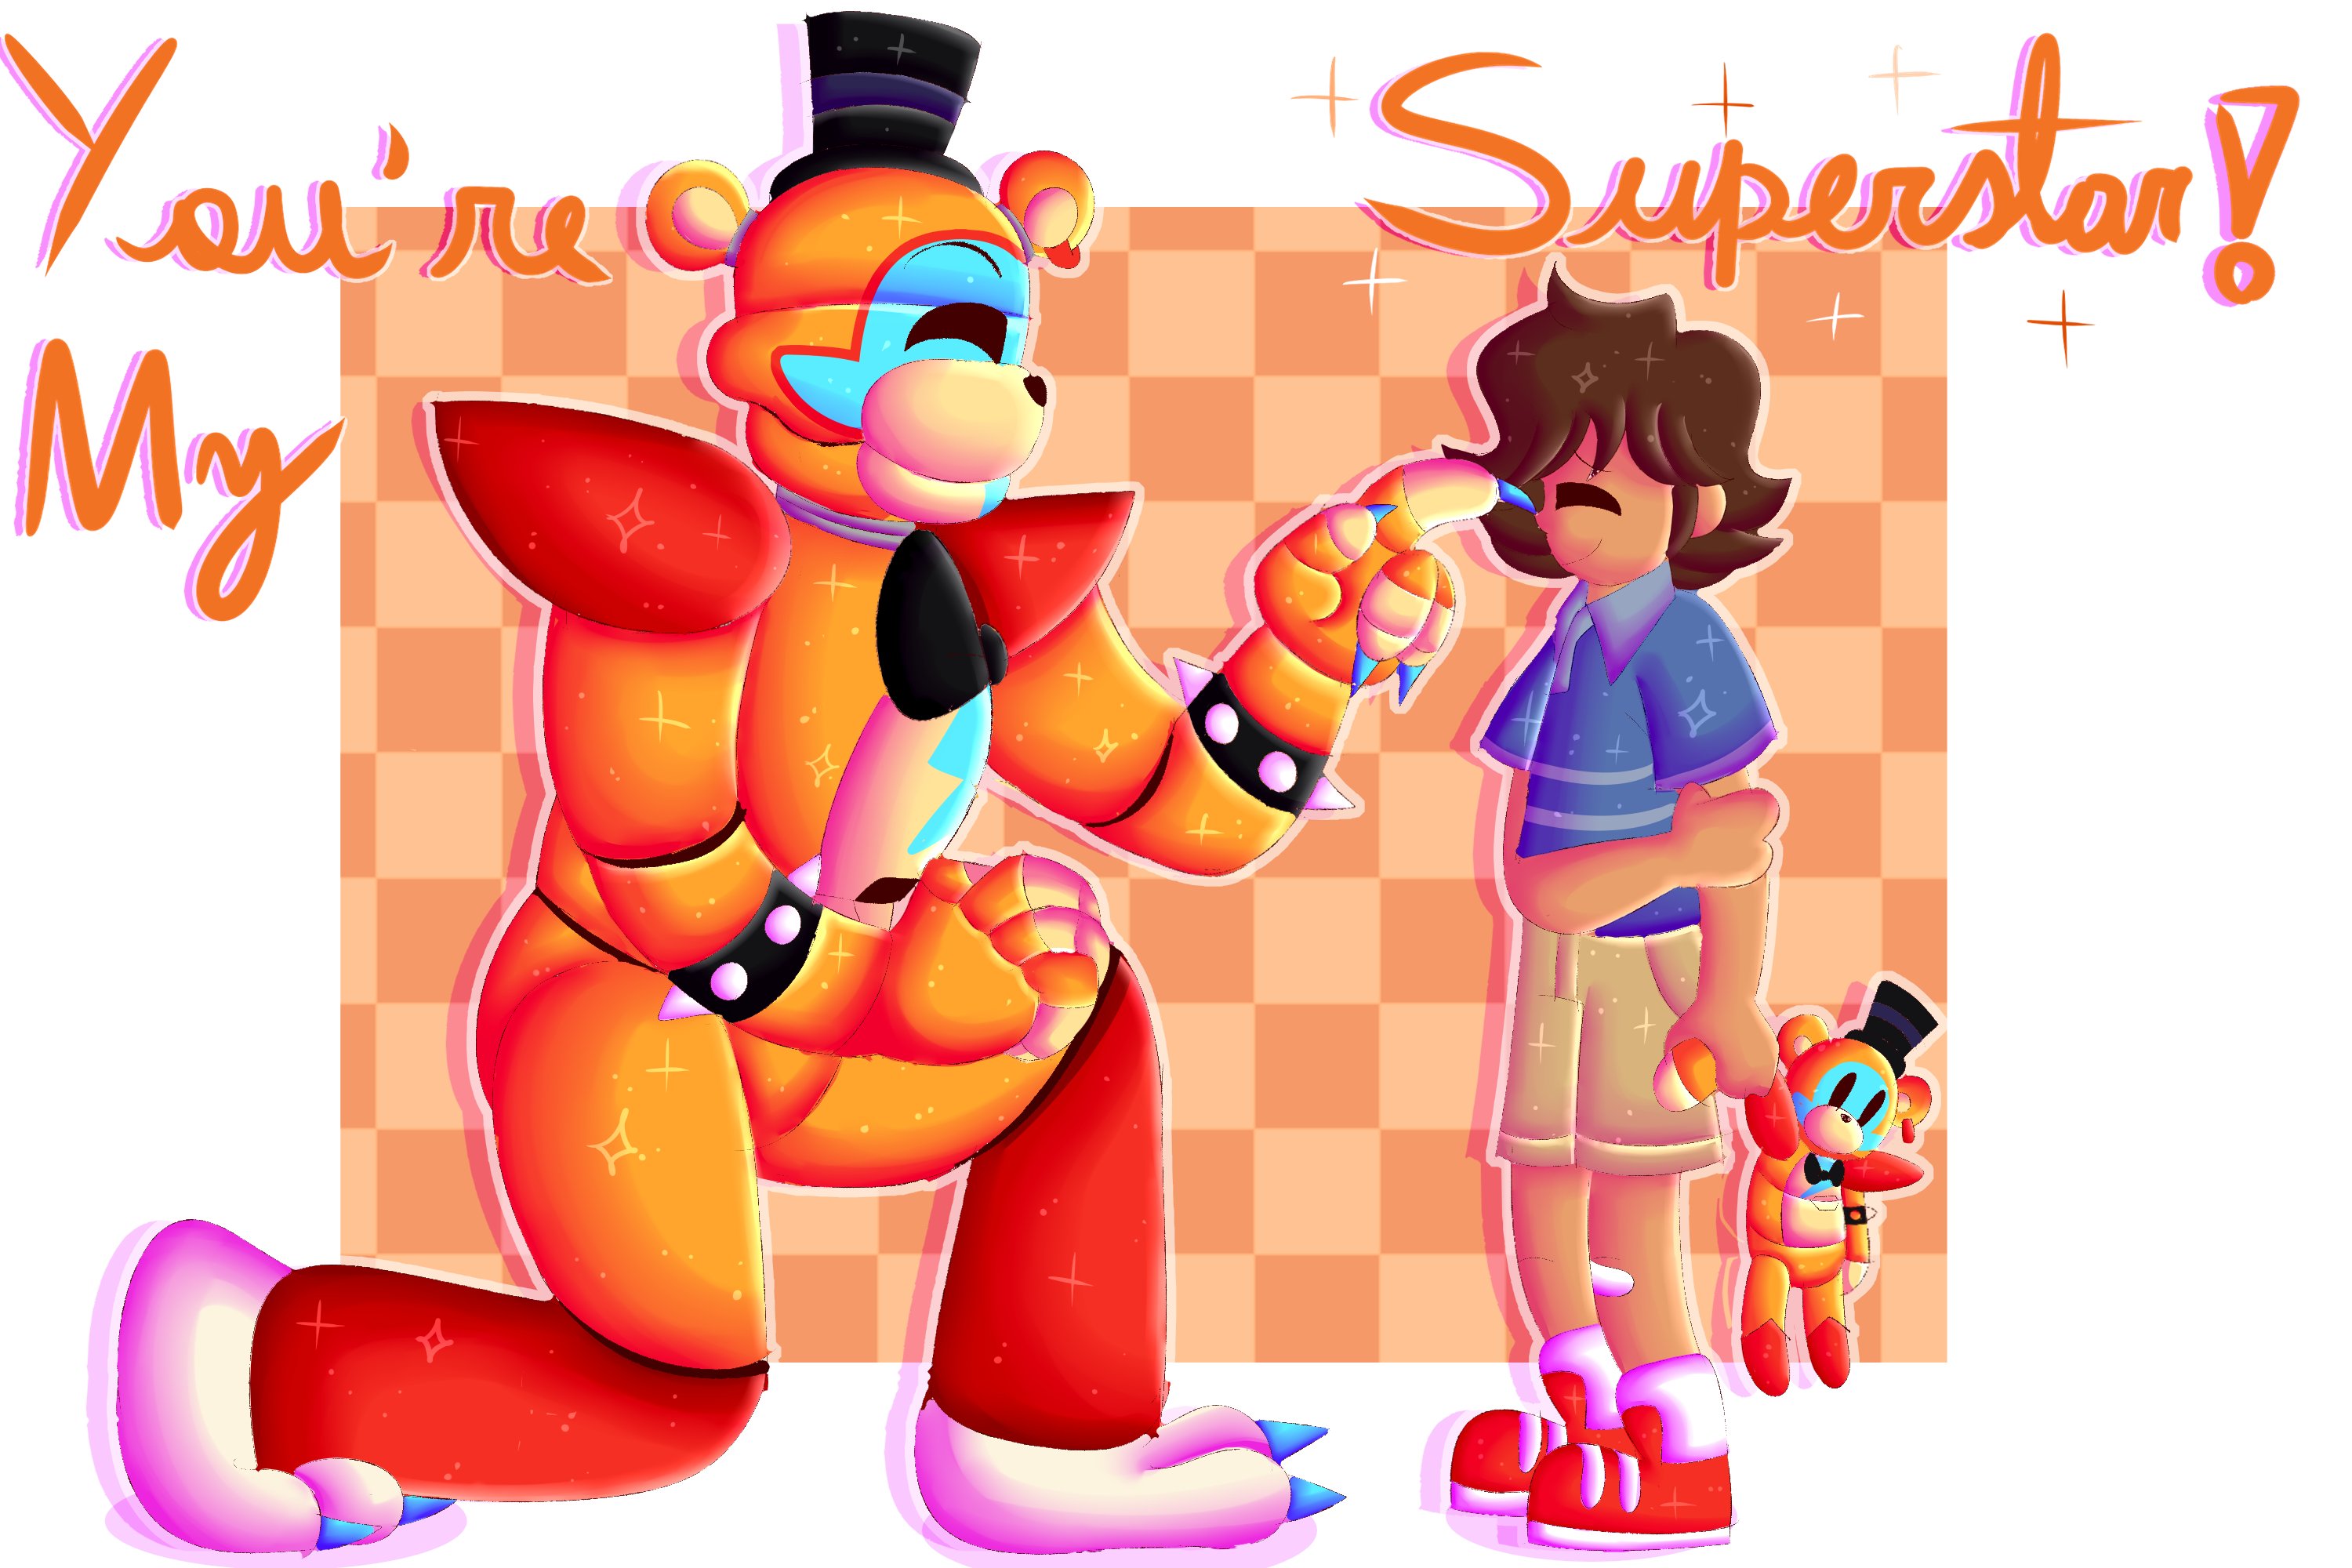 You're My Superstar  Five Nights at Freddy's: Security Breach